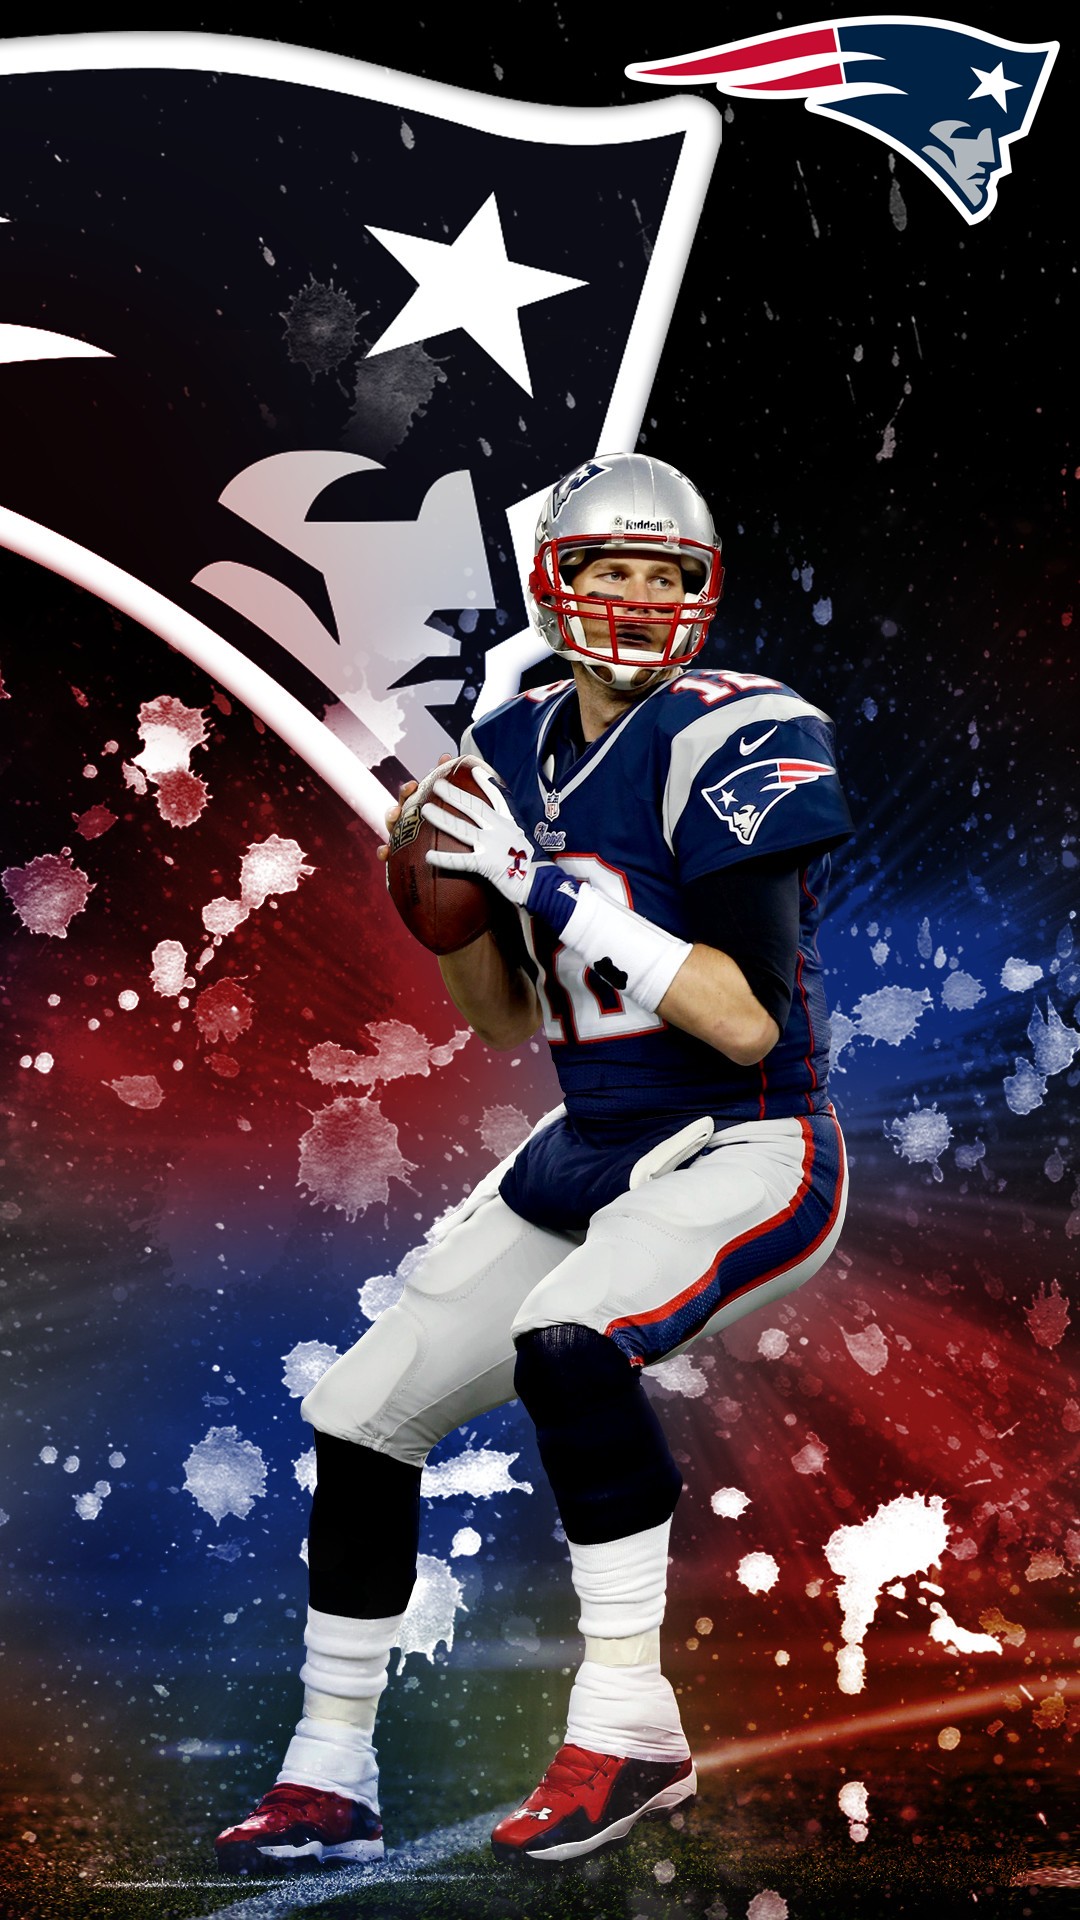 Tom Brady iPhone 7 Plus Wallpaper With Resolution 1080X1920 pixel. You can make this wallpaper for your Mac or Windows Desktop Background, iPhone, Android or Tablet and another Smartphone device for free